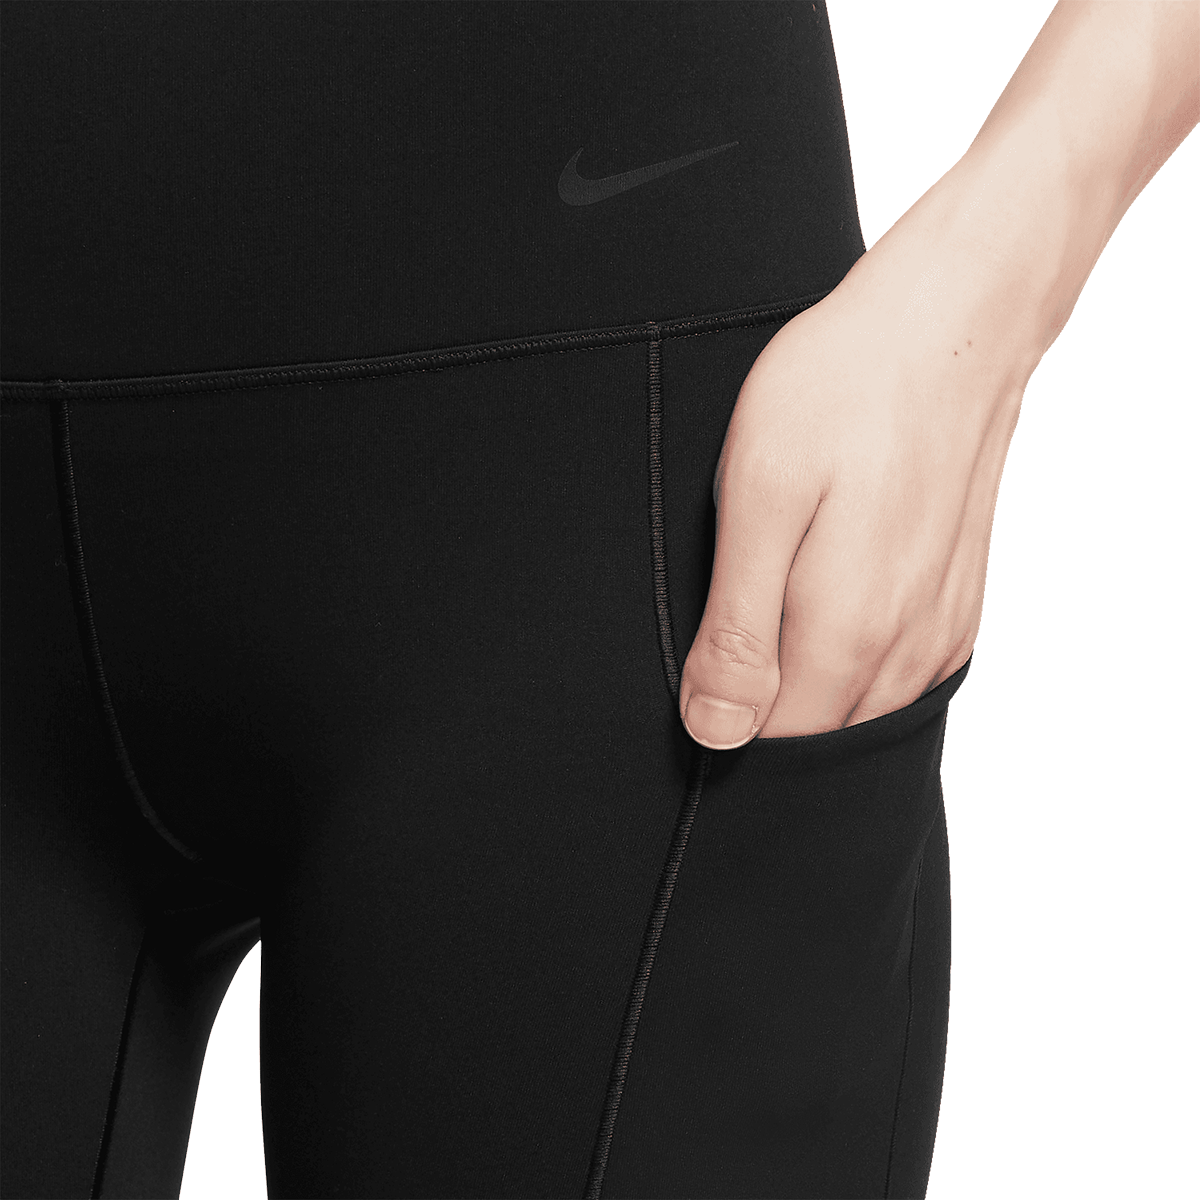 Nike Dri-FIT Universal HR 7/8 Tight, , large image number null